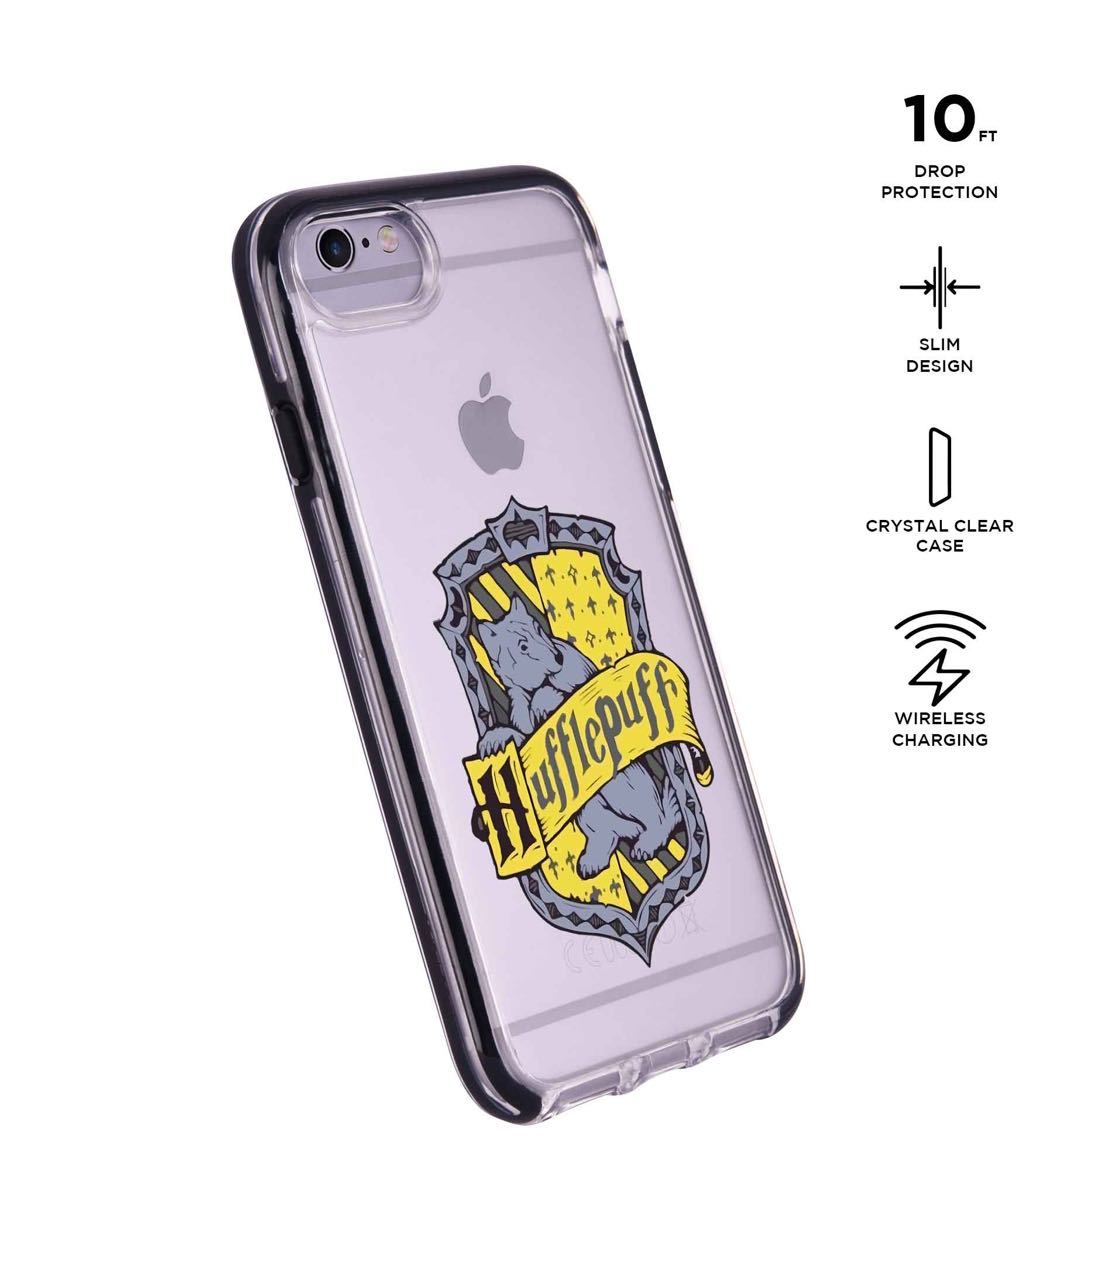 Crest Hufflepuff - Extreme Phone Case for iPhone 6S Plus